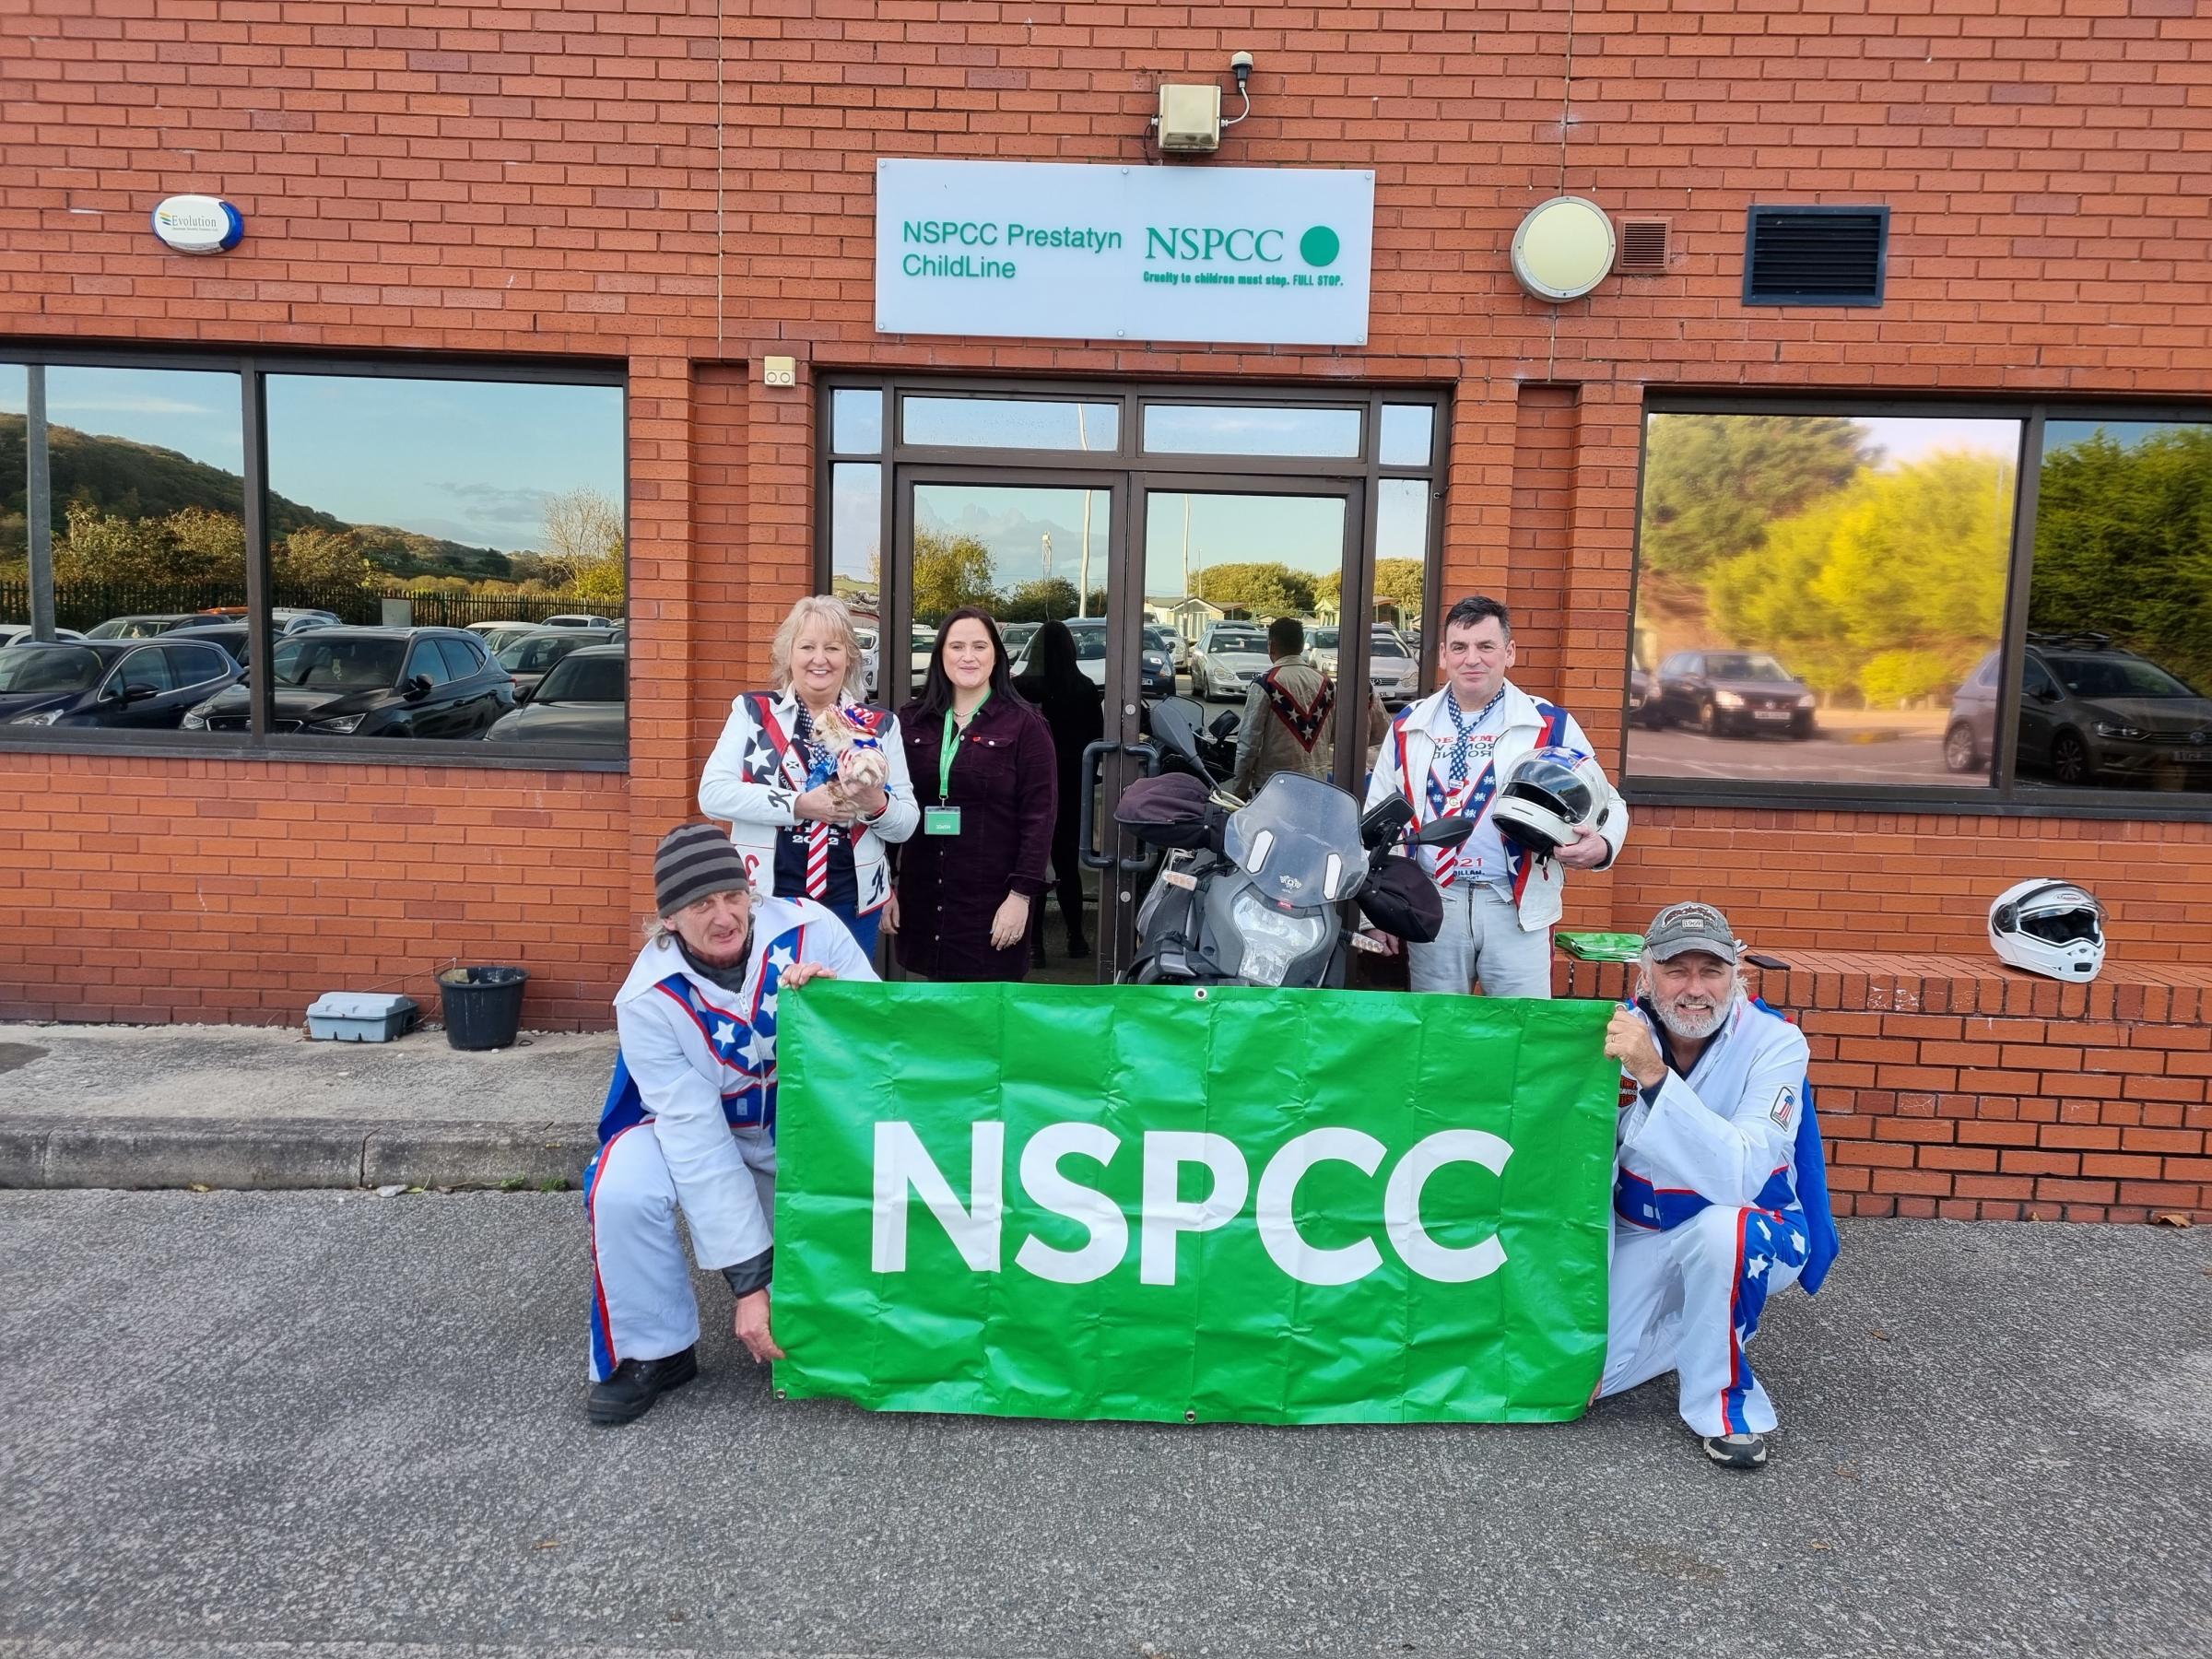 Members of the Cymru Knievels with Jessica Finnegan (third from left) at the NSPCCs Childline Prestatyn base. 